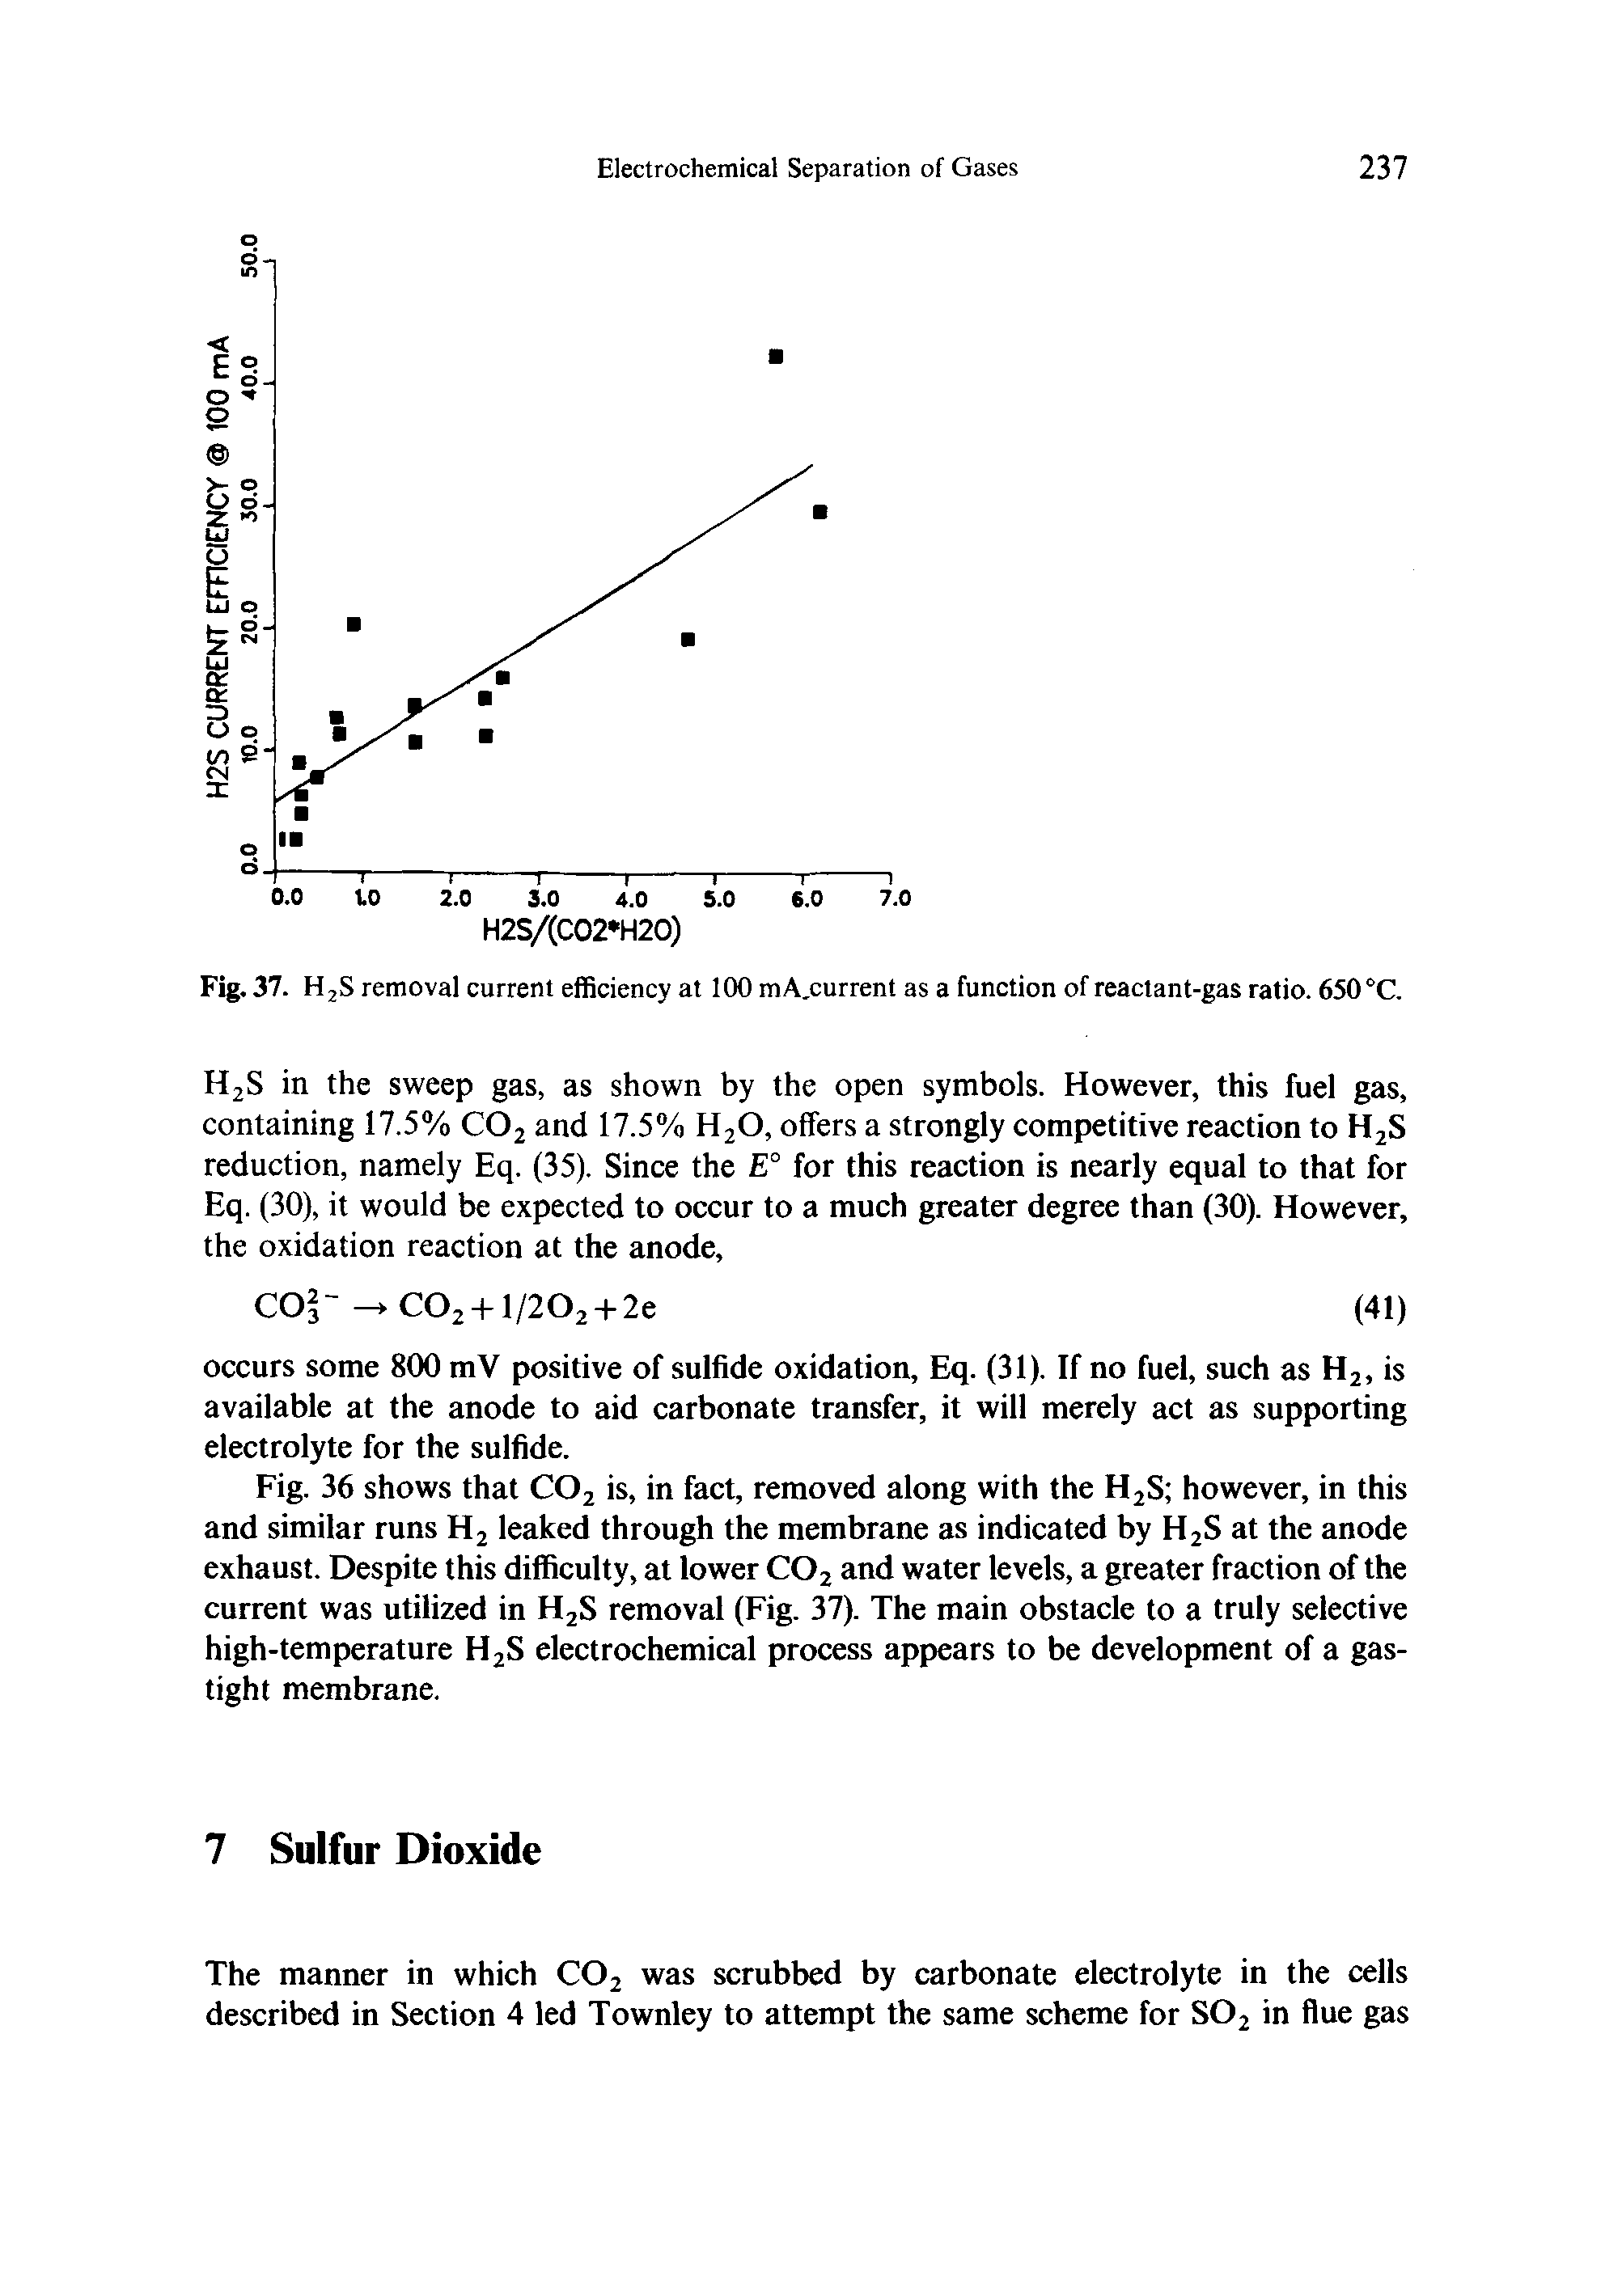 Fig. 36 shows that C02 is, in fact, removed along with the H2S however, in this and similar runs H2 leaked through the membrane as indicated by H2S at the anode exhaust. Despite this difficulty, at lower C02 and water levels, a greater fraction of the current was utilized in H2S removal (Fig. 37). The main obstacle to a truly selective high-temperature H2S electrochemical process appears to be development of a gas-tight membrane.